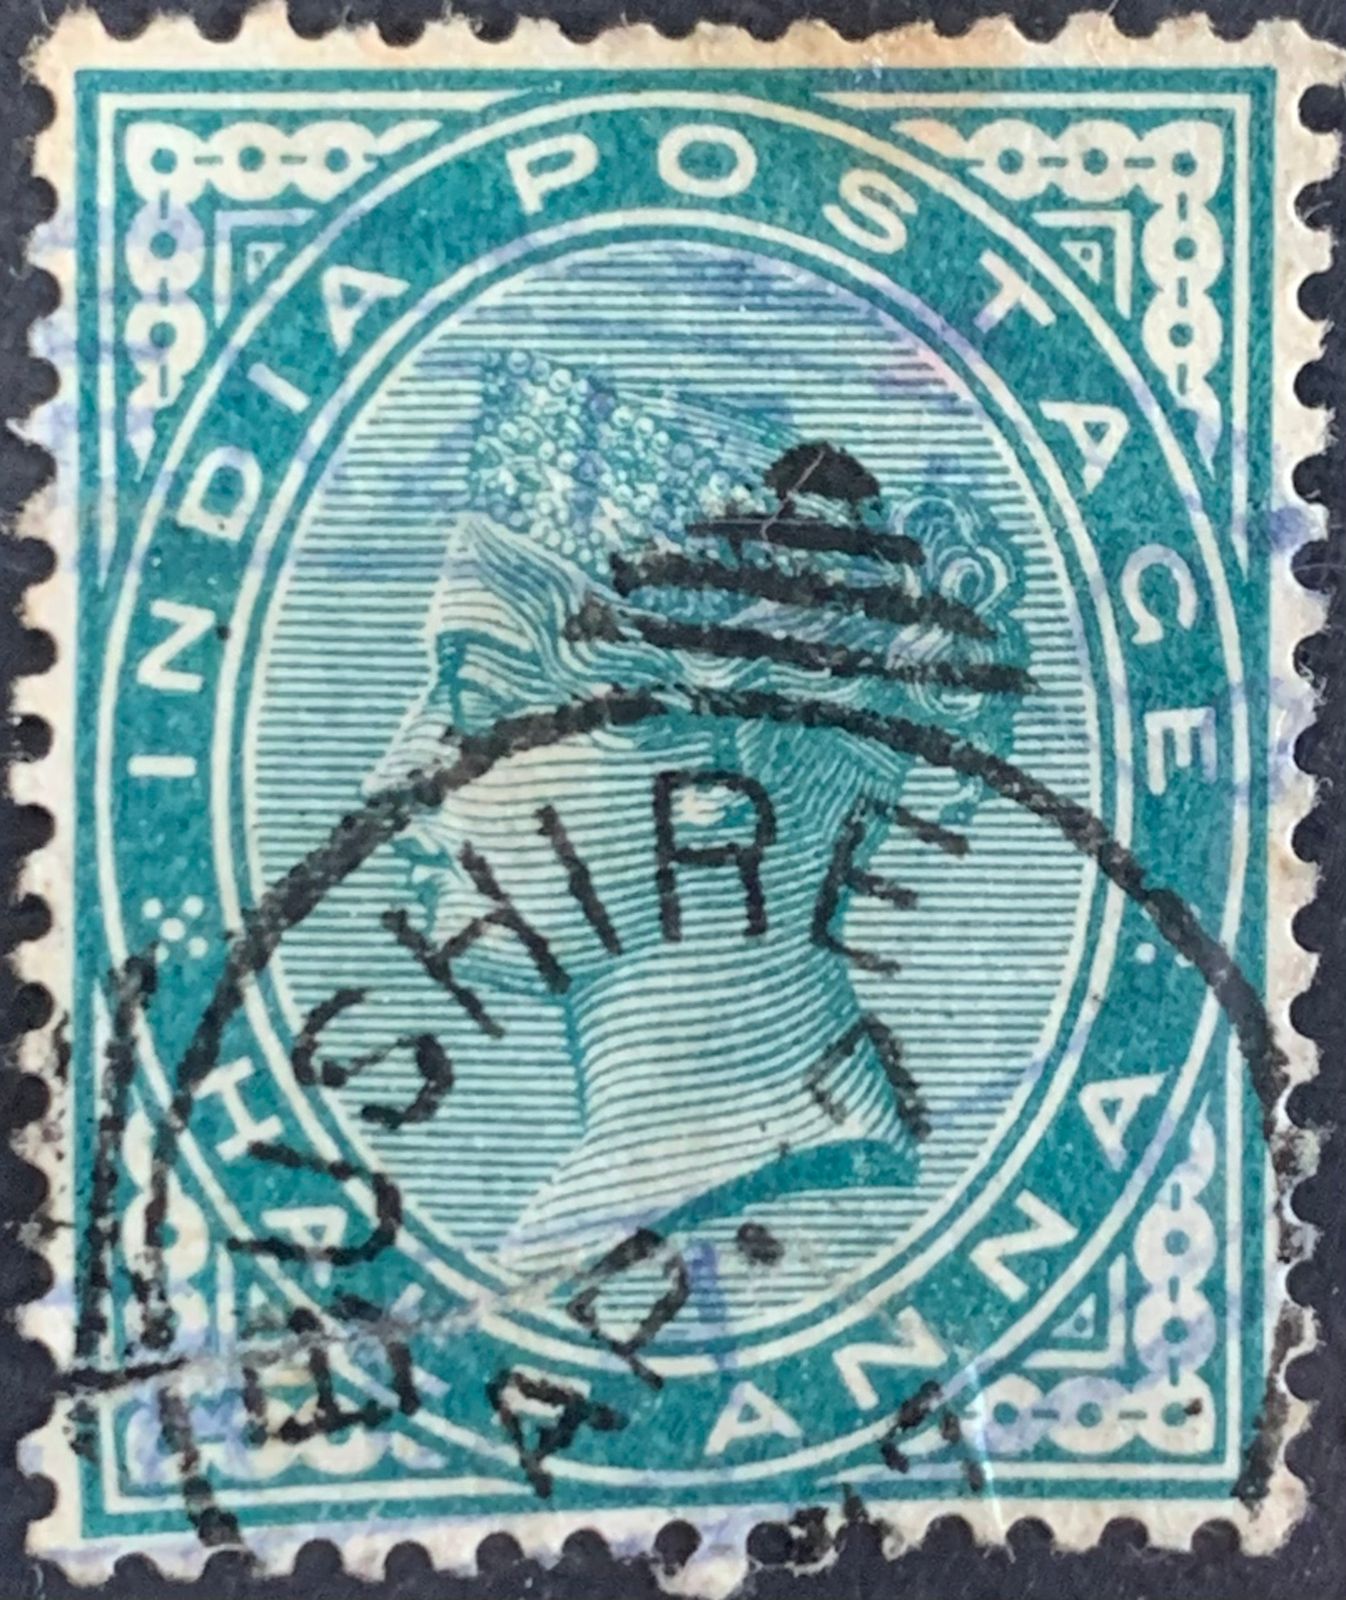 India 1882 QV 1/2a Used Abroad in BUSHIRE